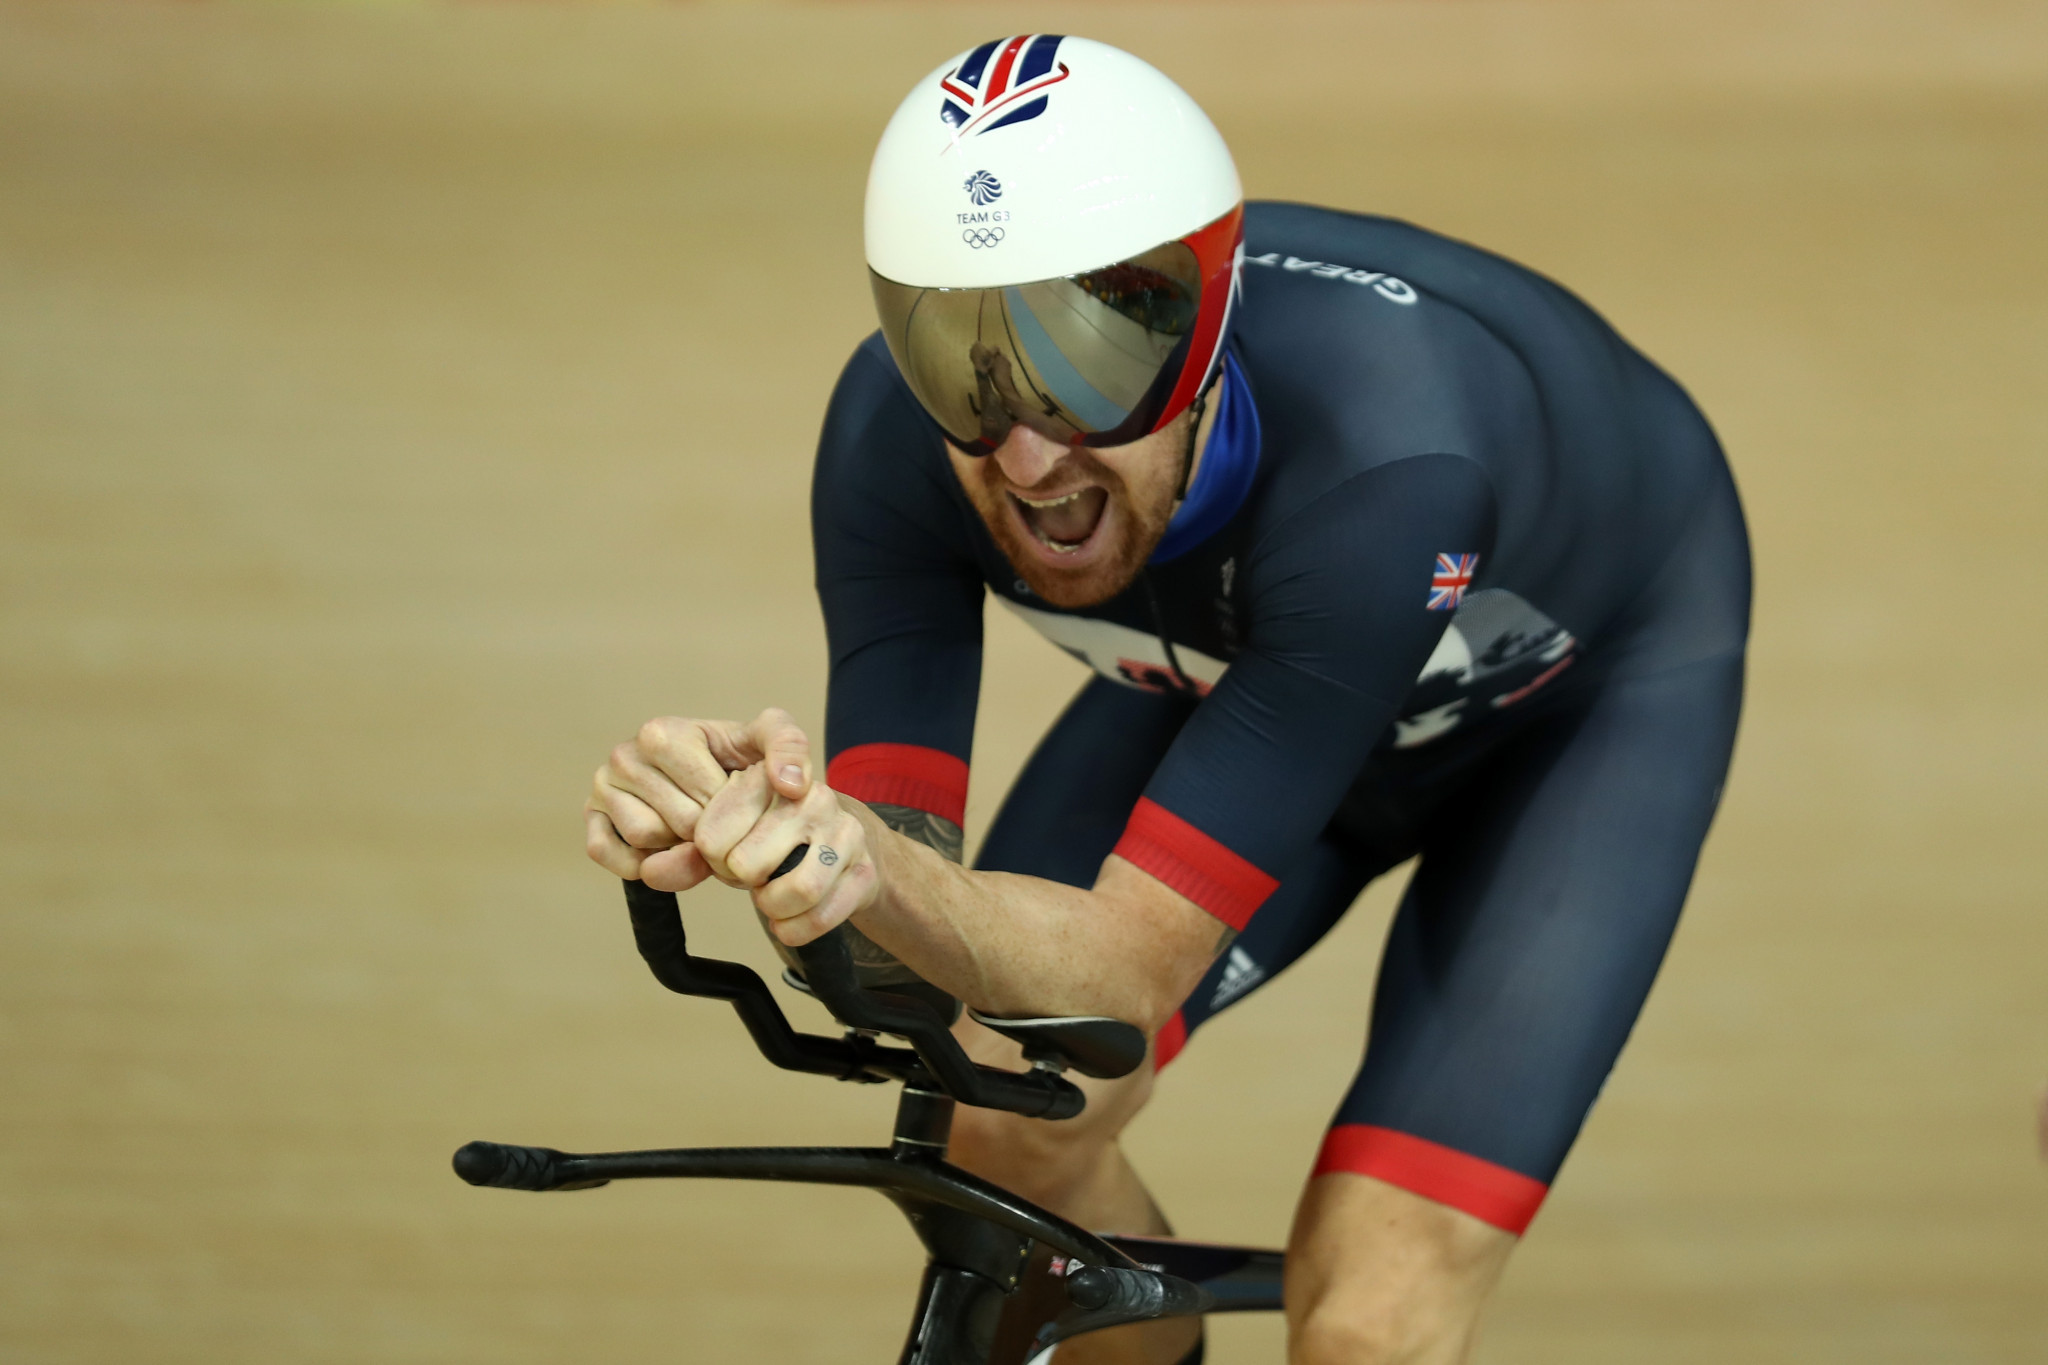 British Cycling was criticised by UK Anti-Doping earlier this year for potentially impeding its investigation into a 